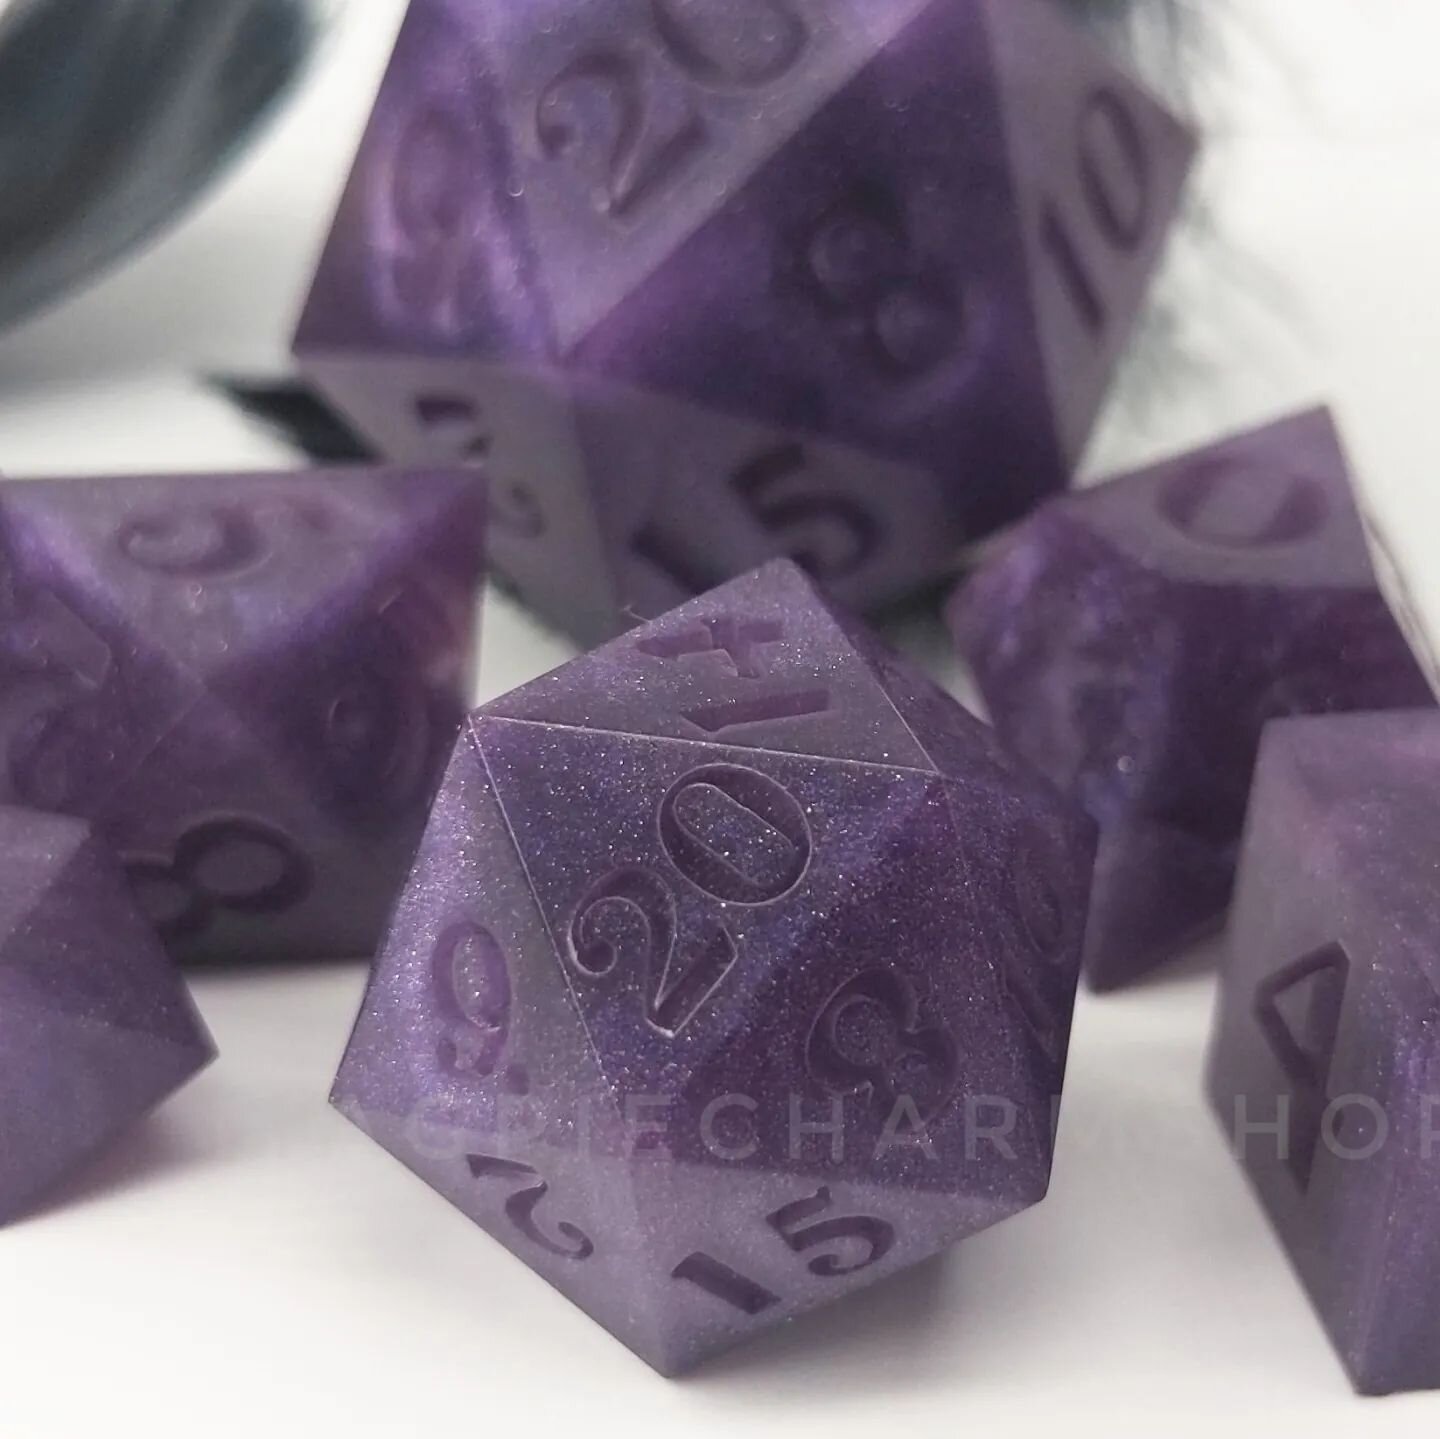 🤫
Yes I still exist! Motivation comes and goes but dice are eternal. New molds are curing, new plans are forming, and new dice are coming into being.
.
.
#dice #d20 #dnd #handmadedice #homebreweddice #magpiecharm #dicemakers #resincasting  #ttrpg #d